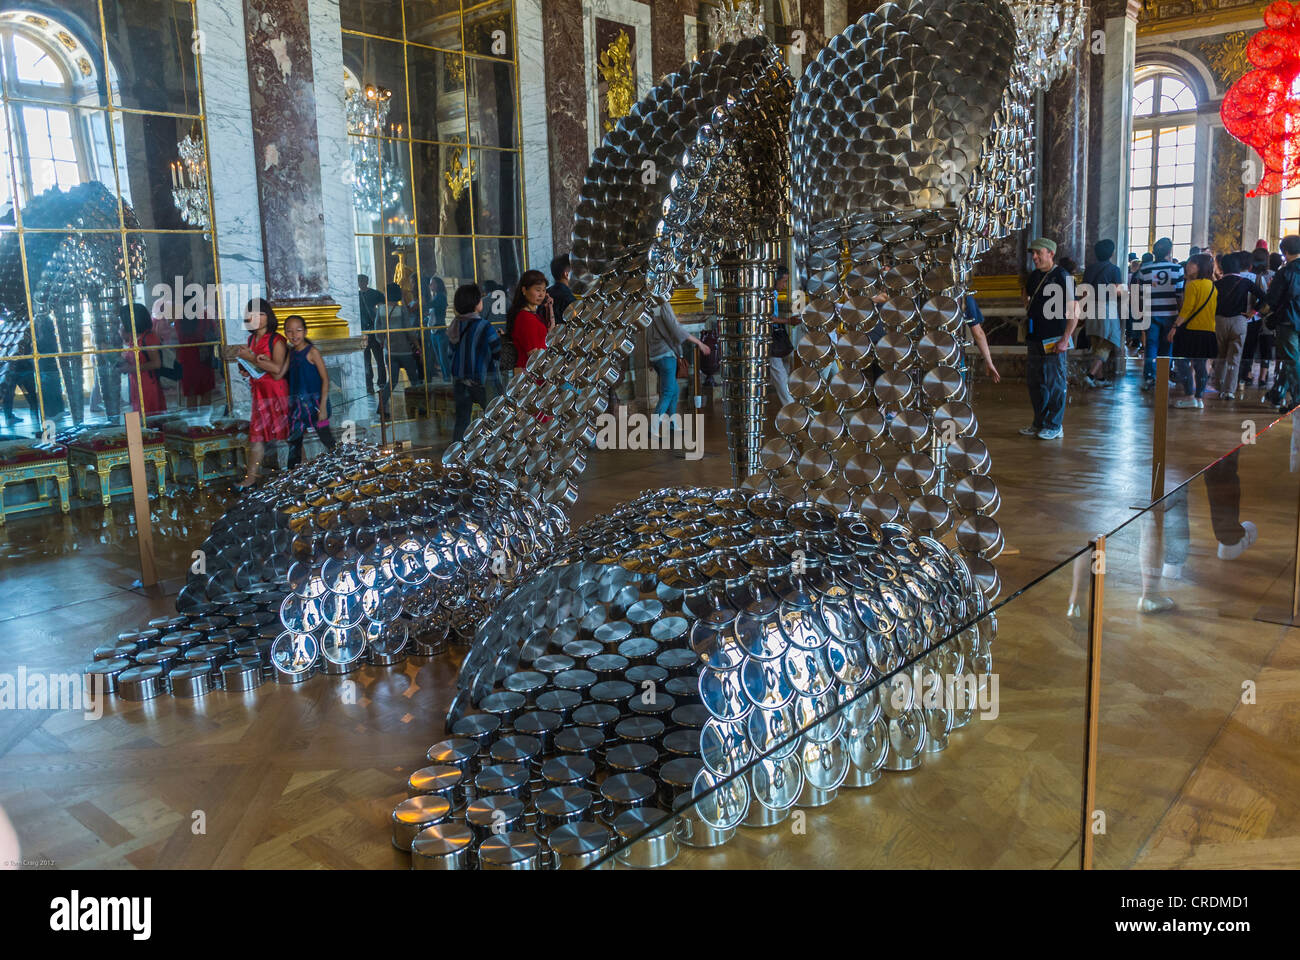 Paris, France, Tourists Visiting Contemporary Arts Show "Joana Vasconcelos"  "Marilyn" , Art Galleries inside the Chateau de Versailles, French Castle,  The Hall of Mirrors, UNUSUAL PARIS Stock Photo - Alamy